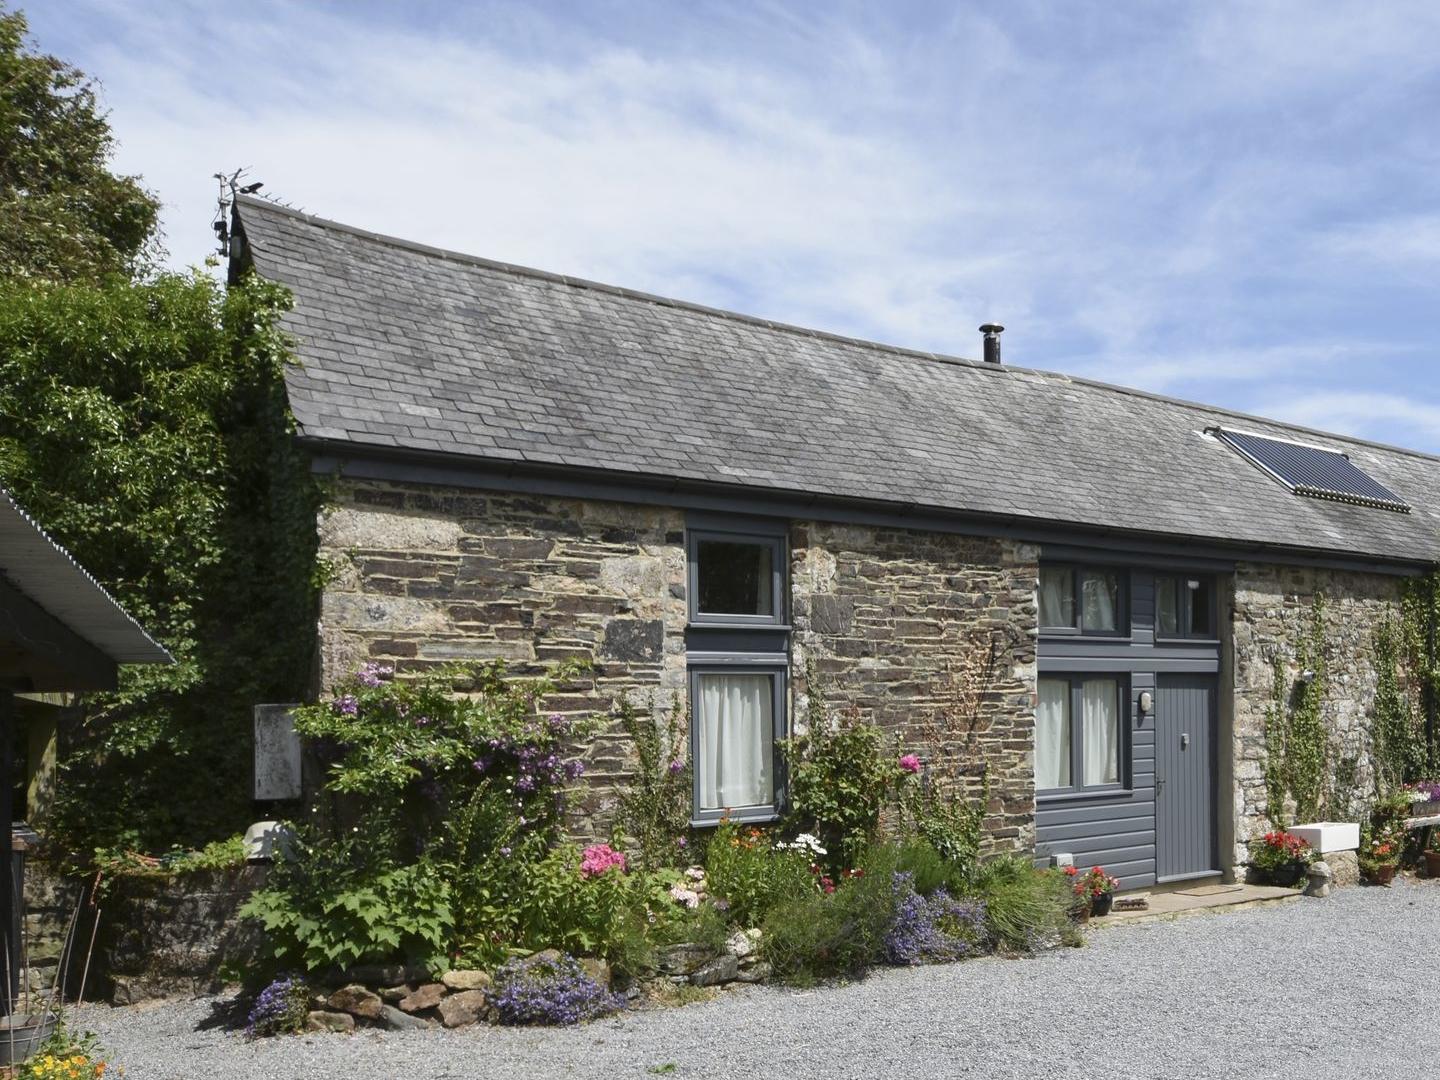 The Stone Barn Cottage